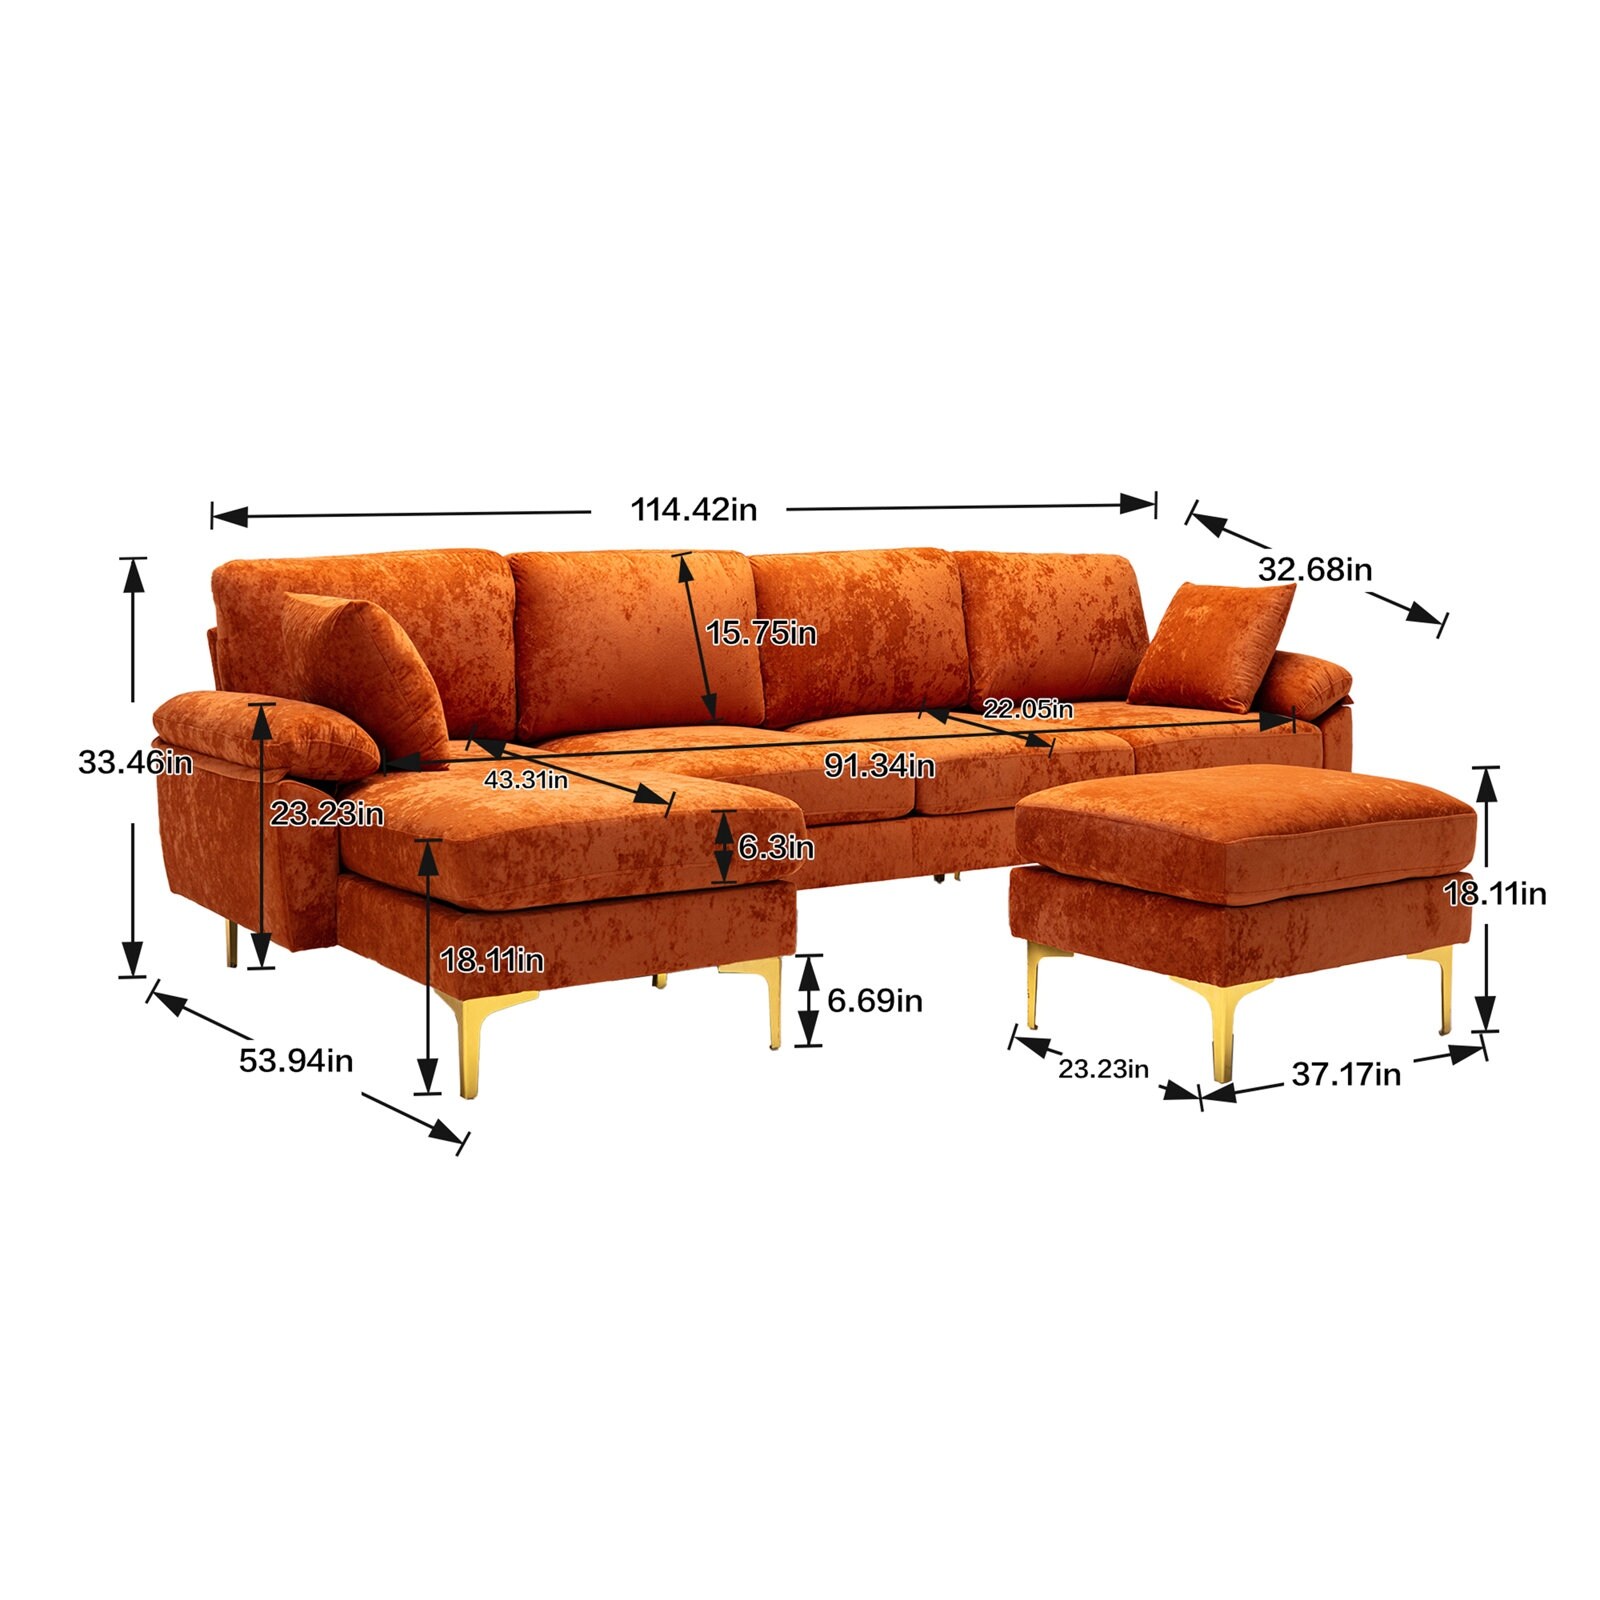 L-Shaped Living Room Sectional Sofa, Convertible Modular Sofa with Gold Metal Legs